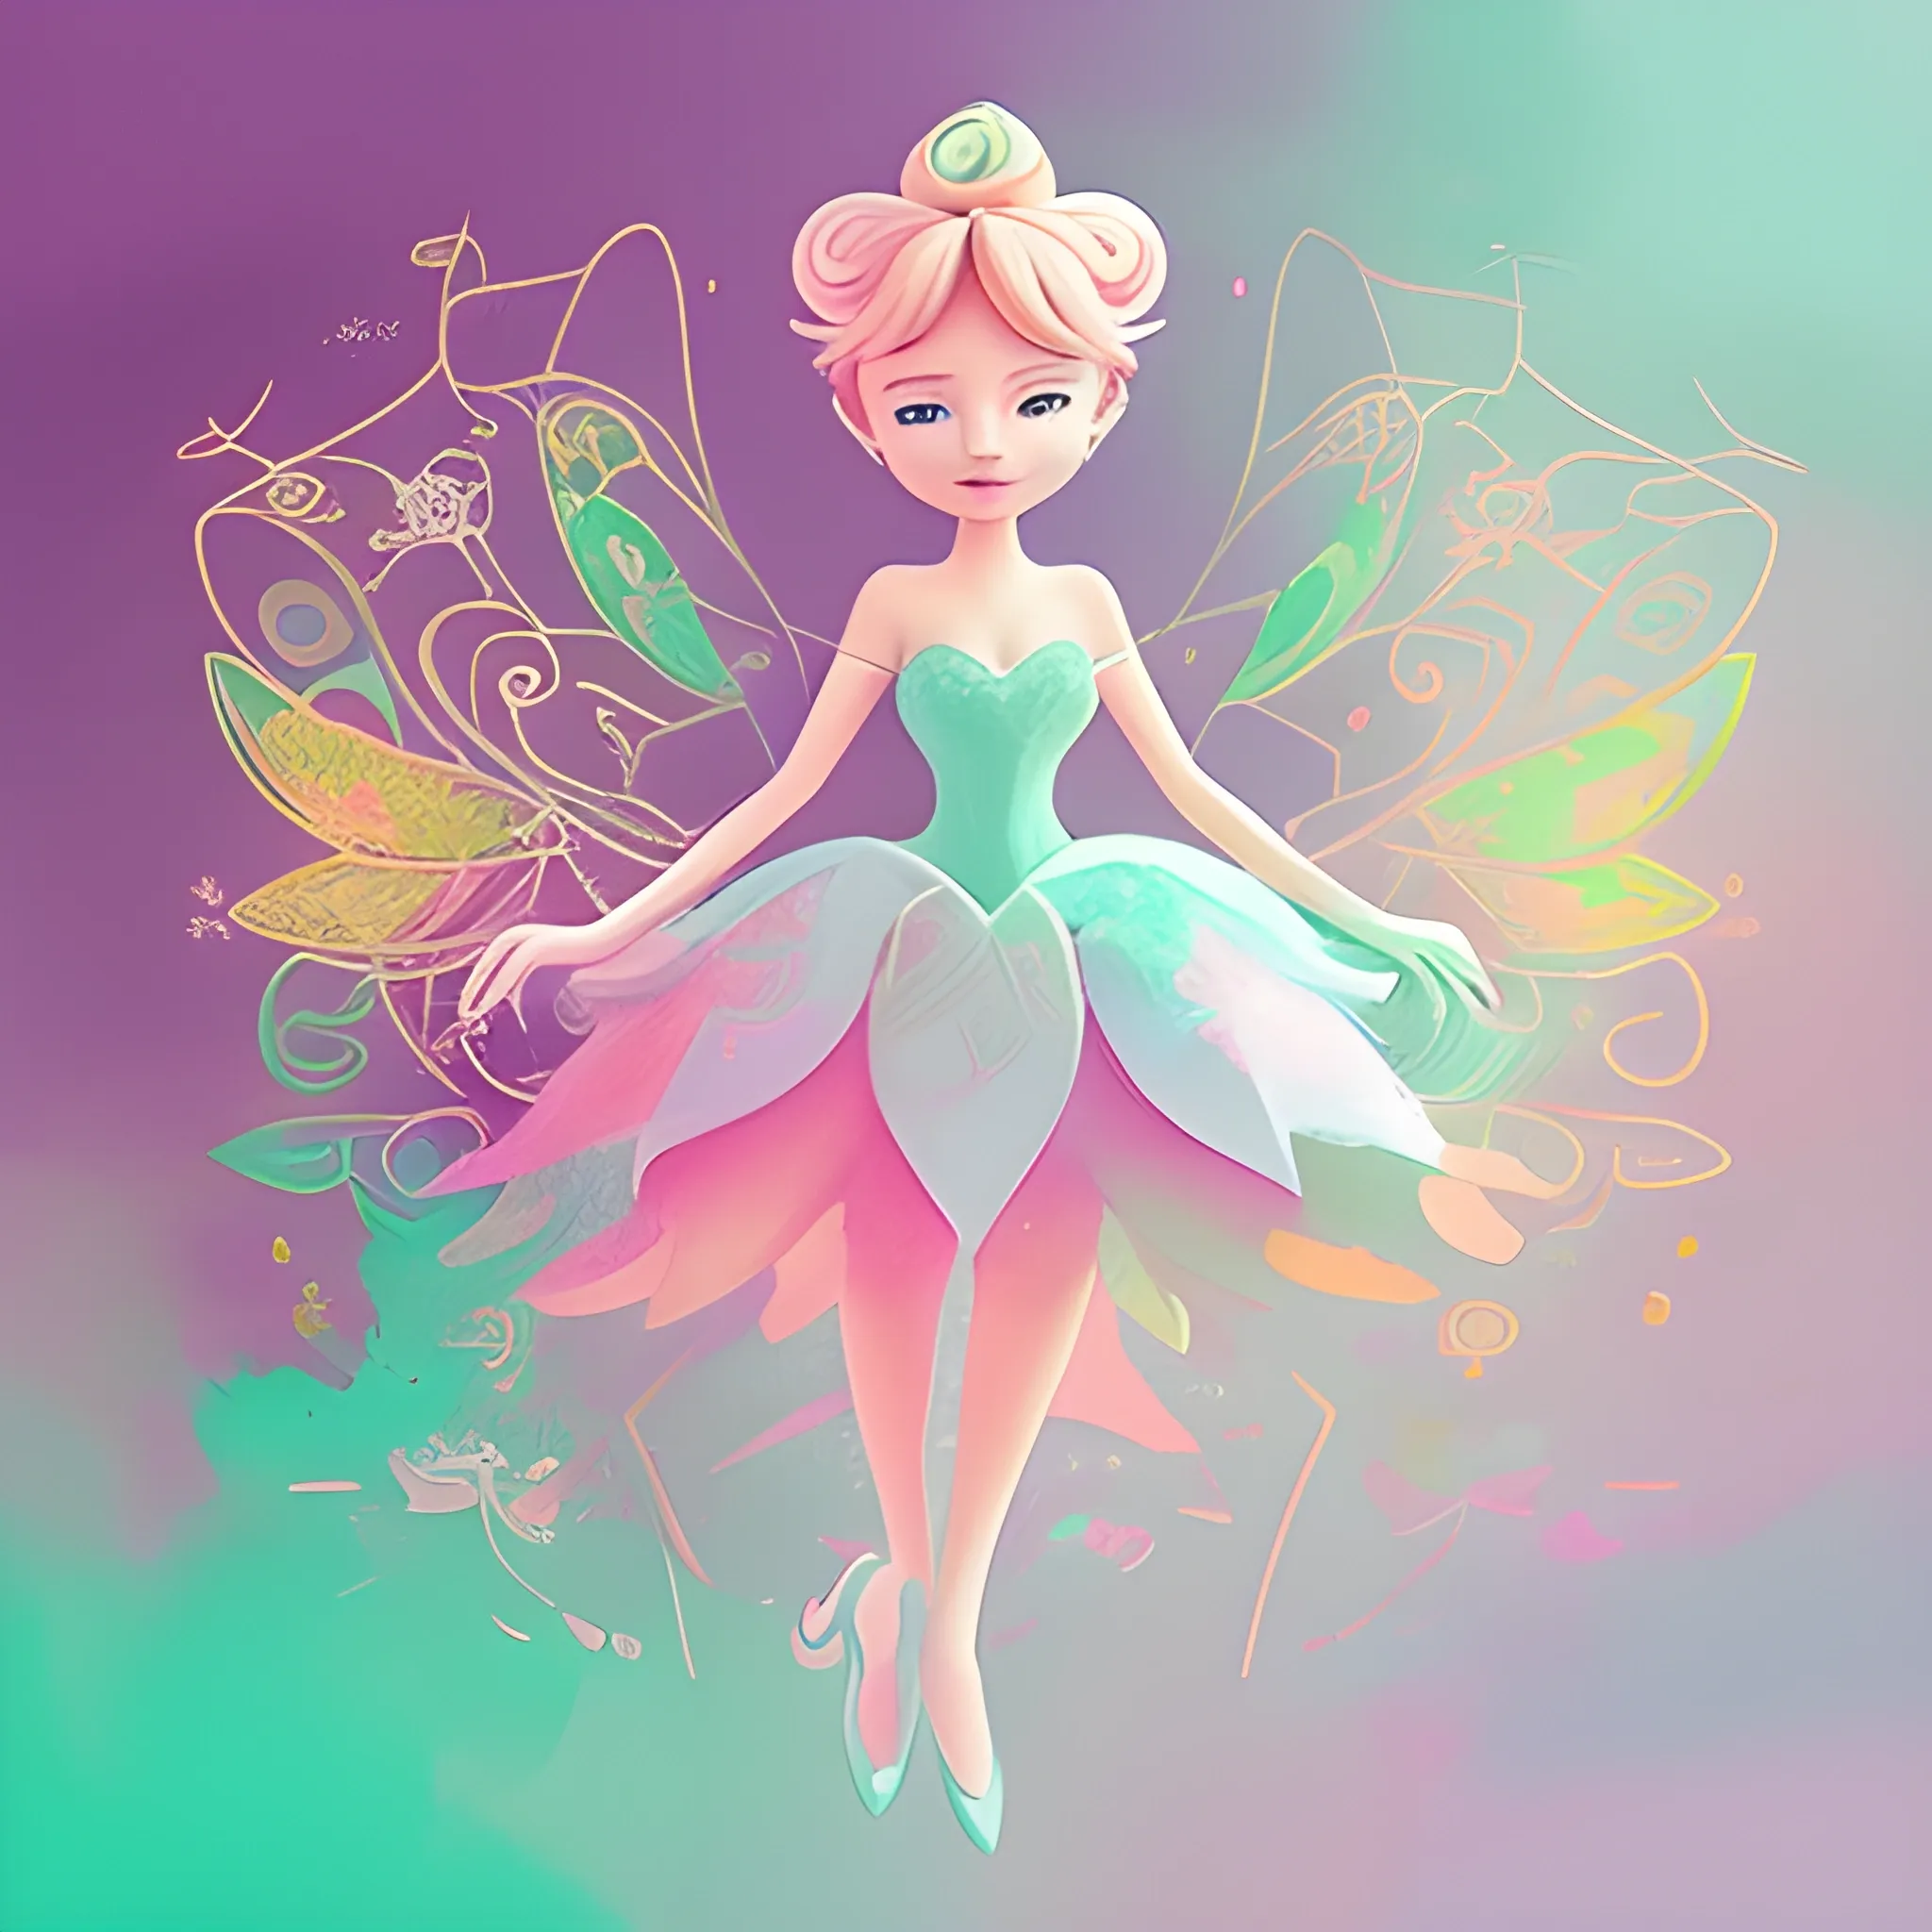 chaotic artwork using tinker bell animation movie element in pastel colour scheme. soft focus print designs. Evelyn Tan  
(_o3oeve_art on instagram) style

graphic, animated, characters, 